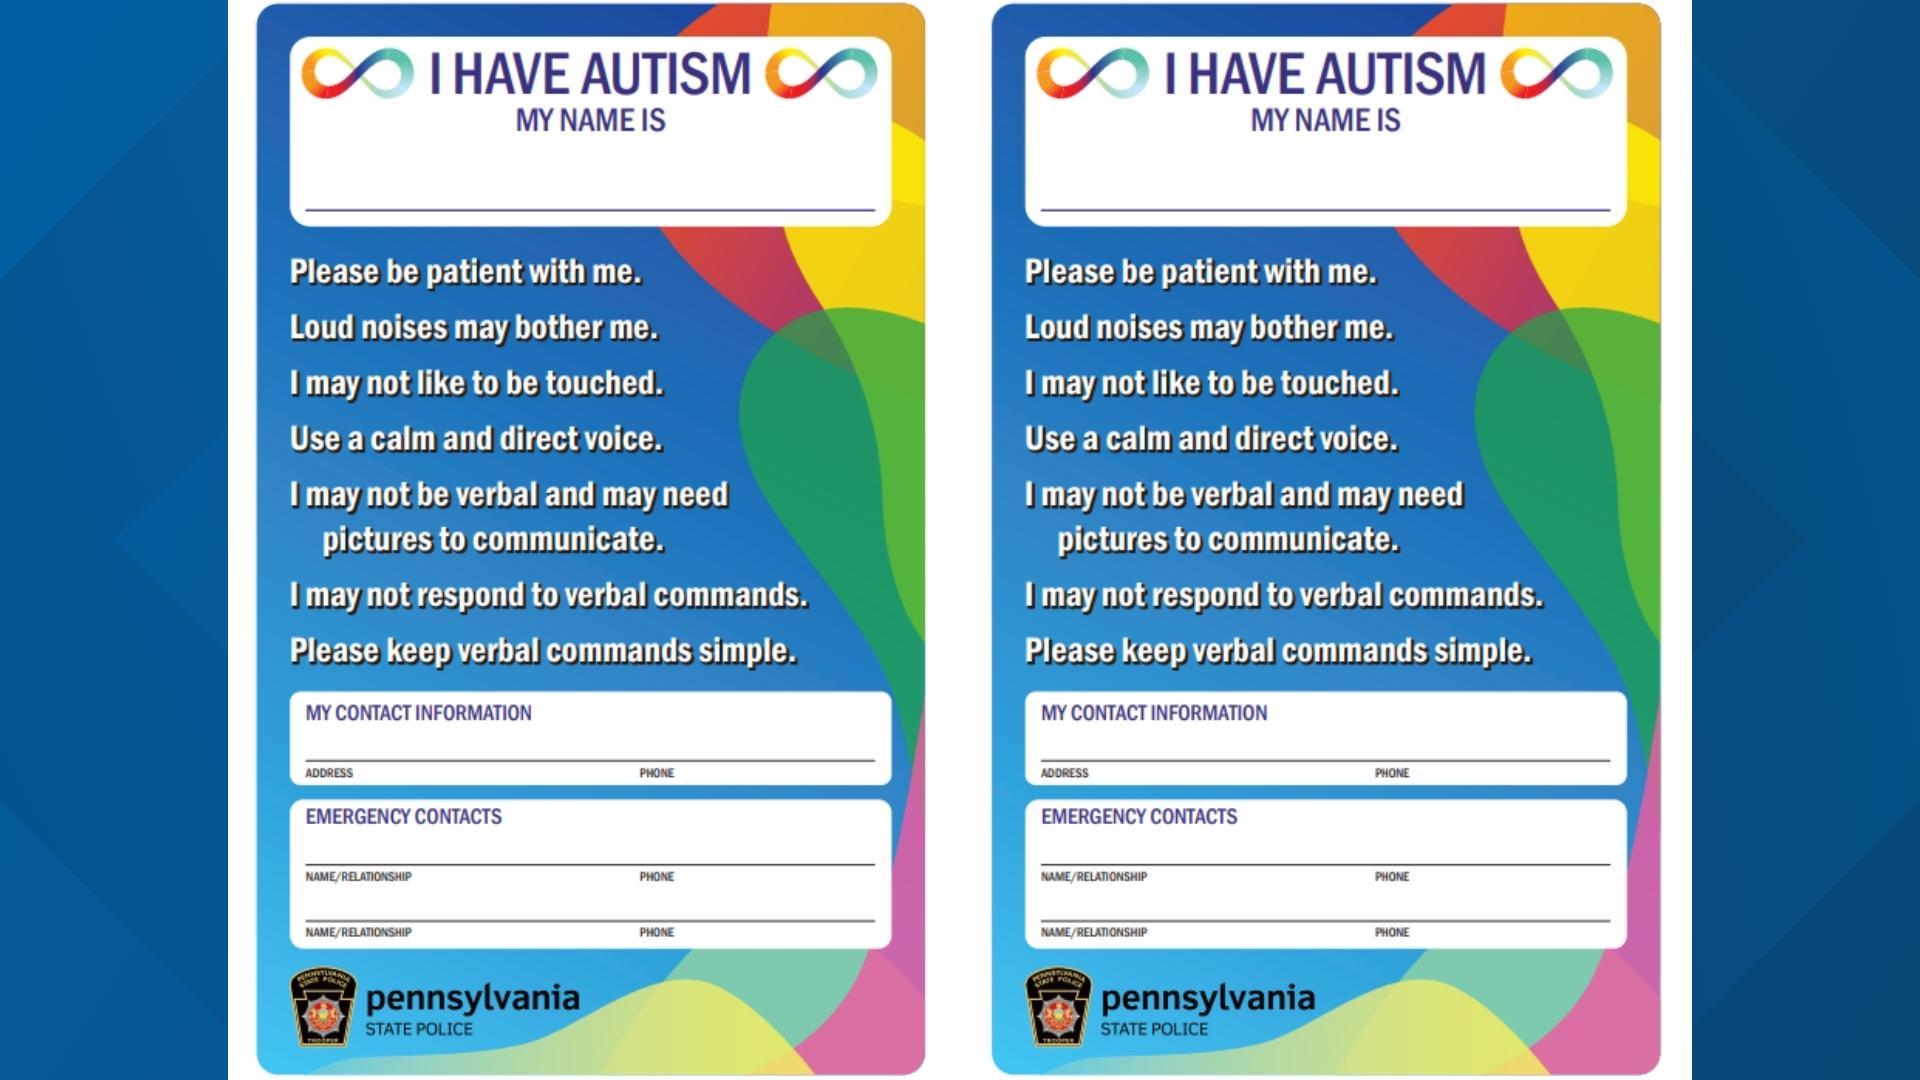 The cards are meant to improve interactions between officers and those on the autism spectrum.